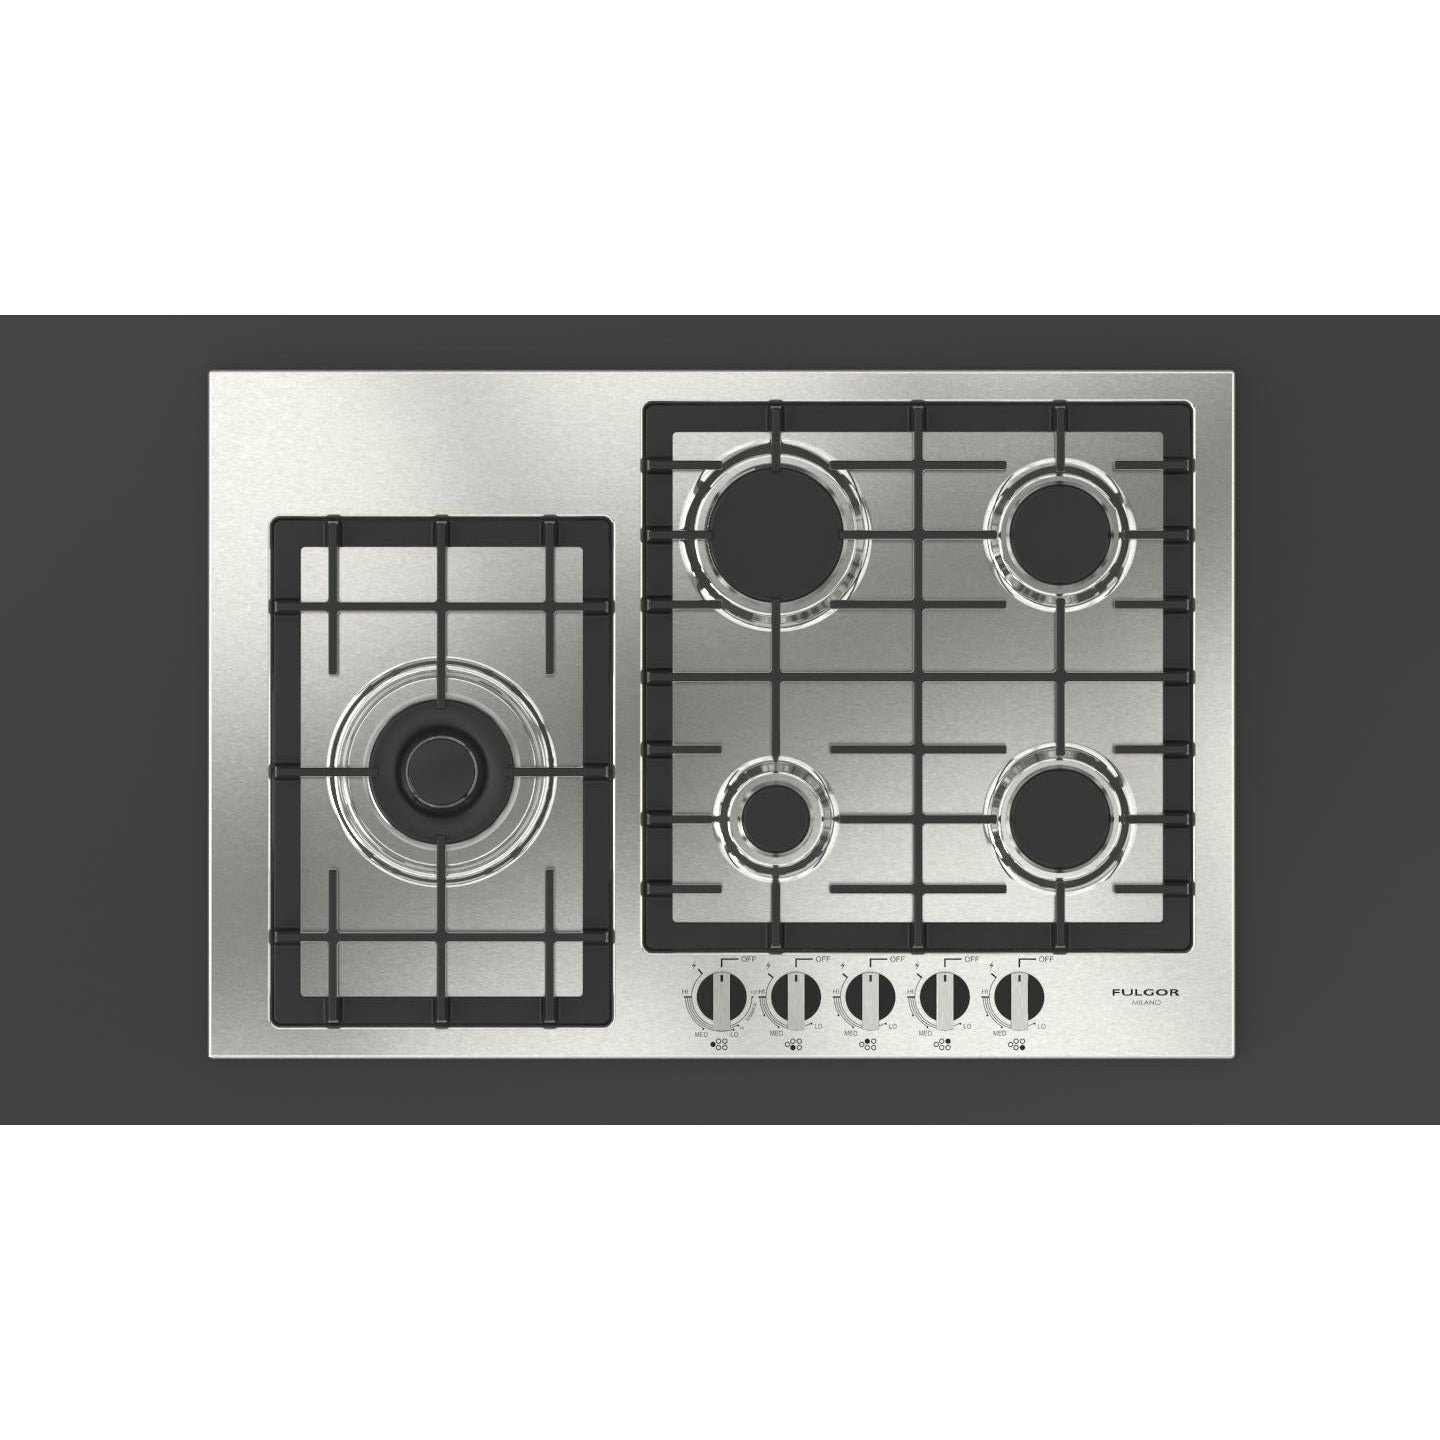 Fulgor Milano 30" Gas Cooktop with 5 European Sealed Burners - F4GK30S1